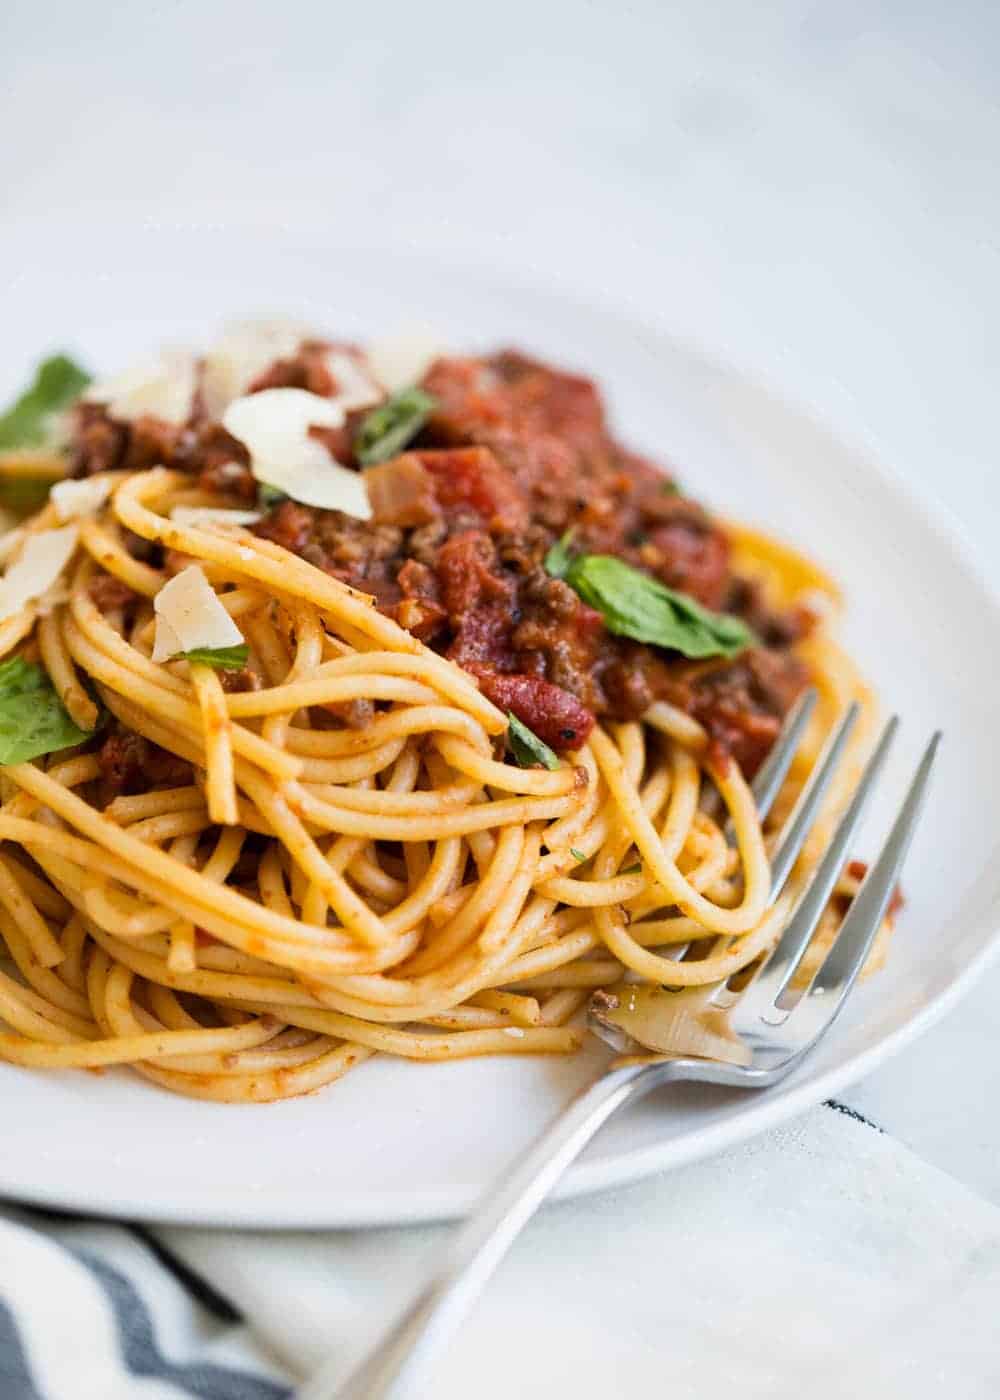 Spaghetti bolognese on plate with fork.